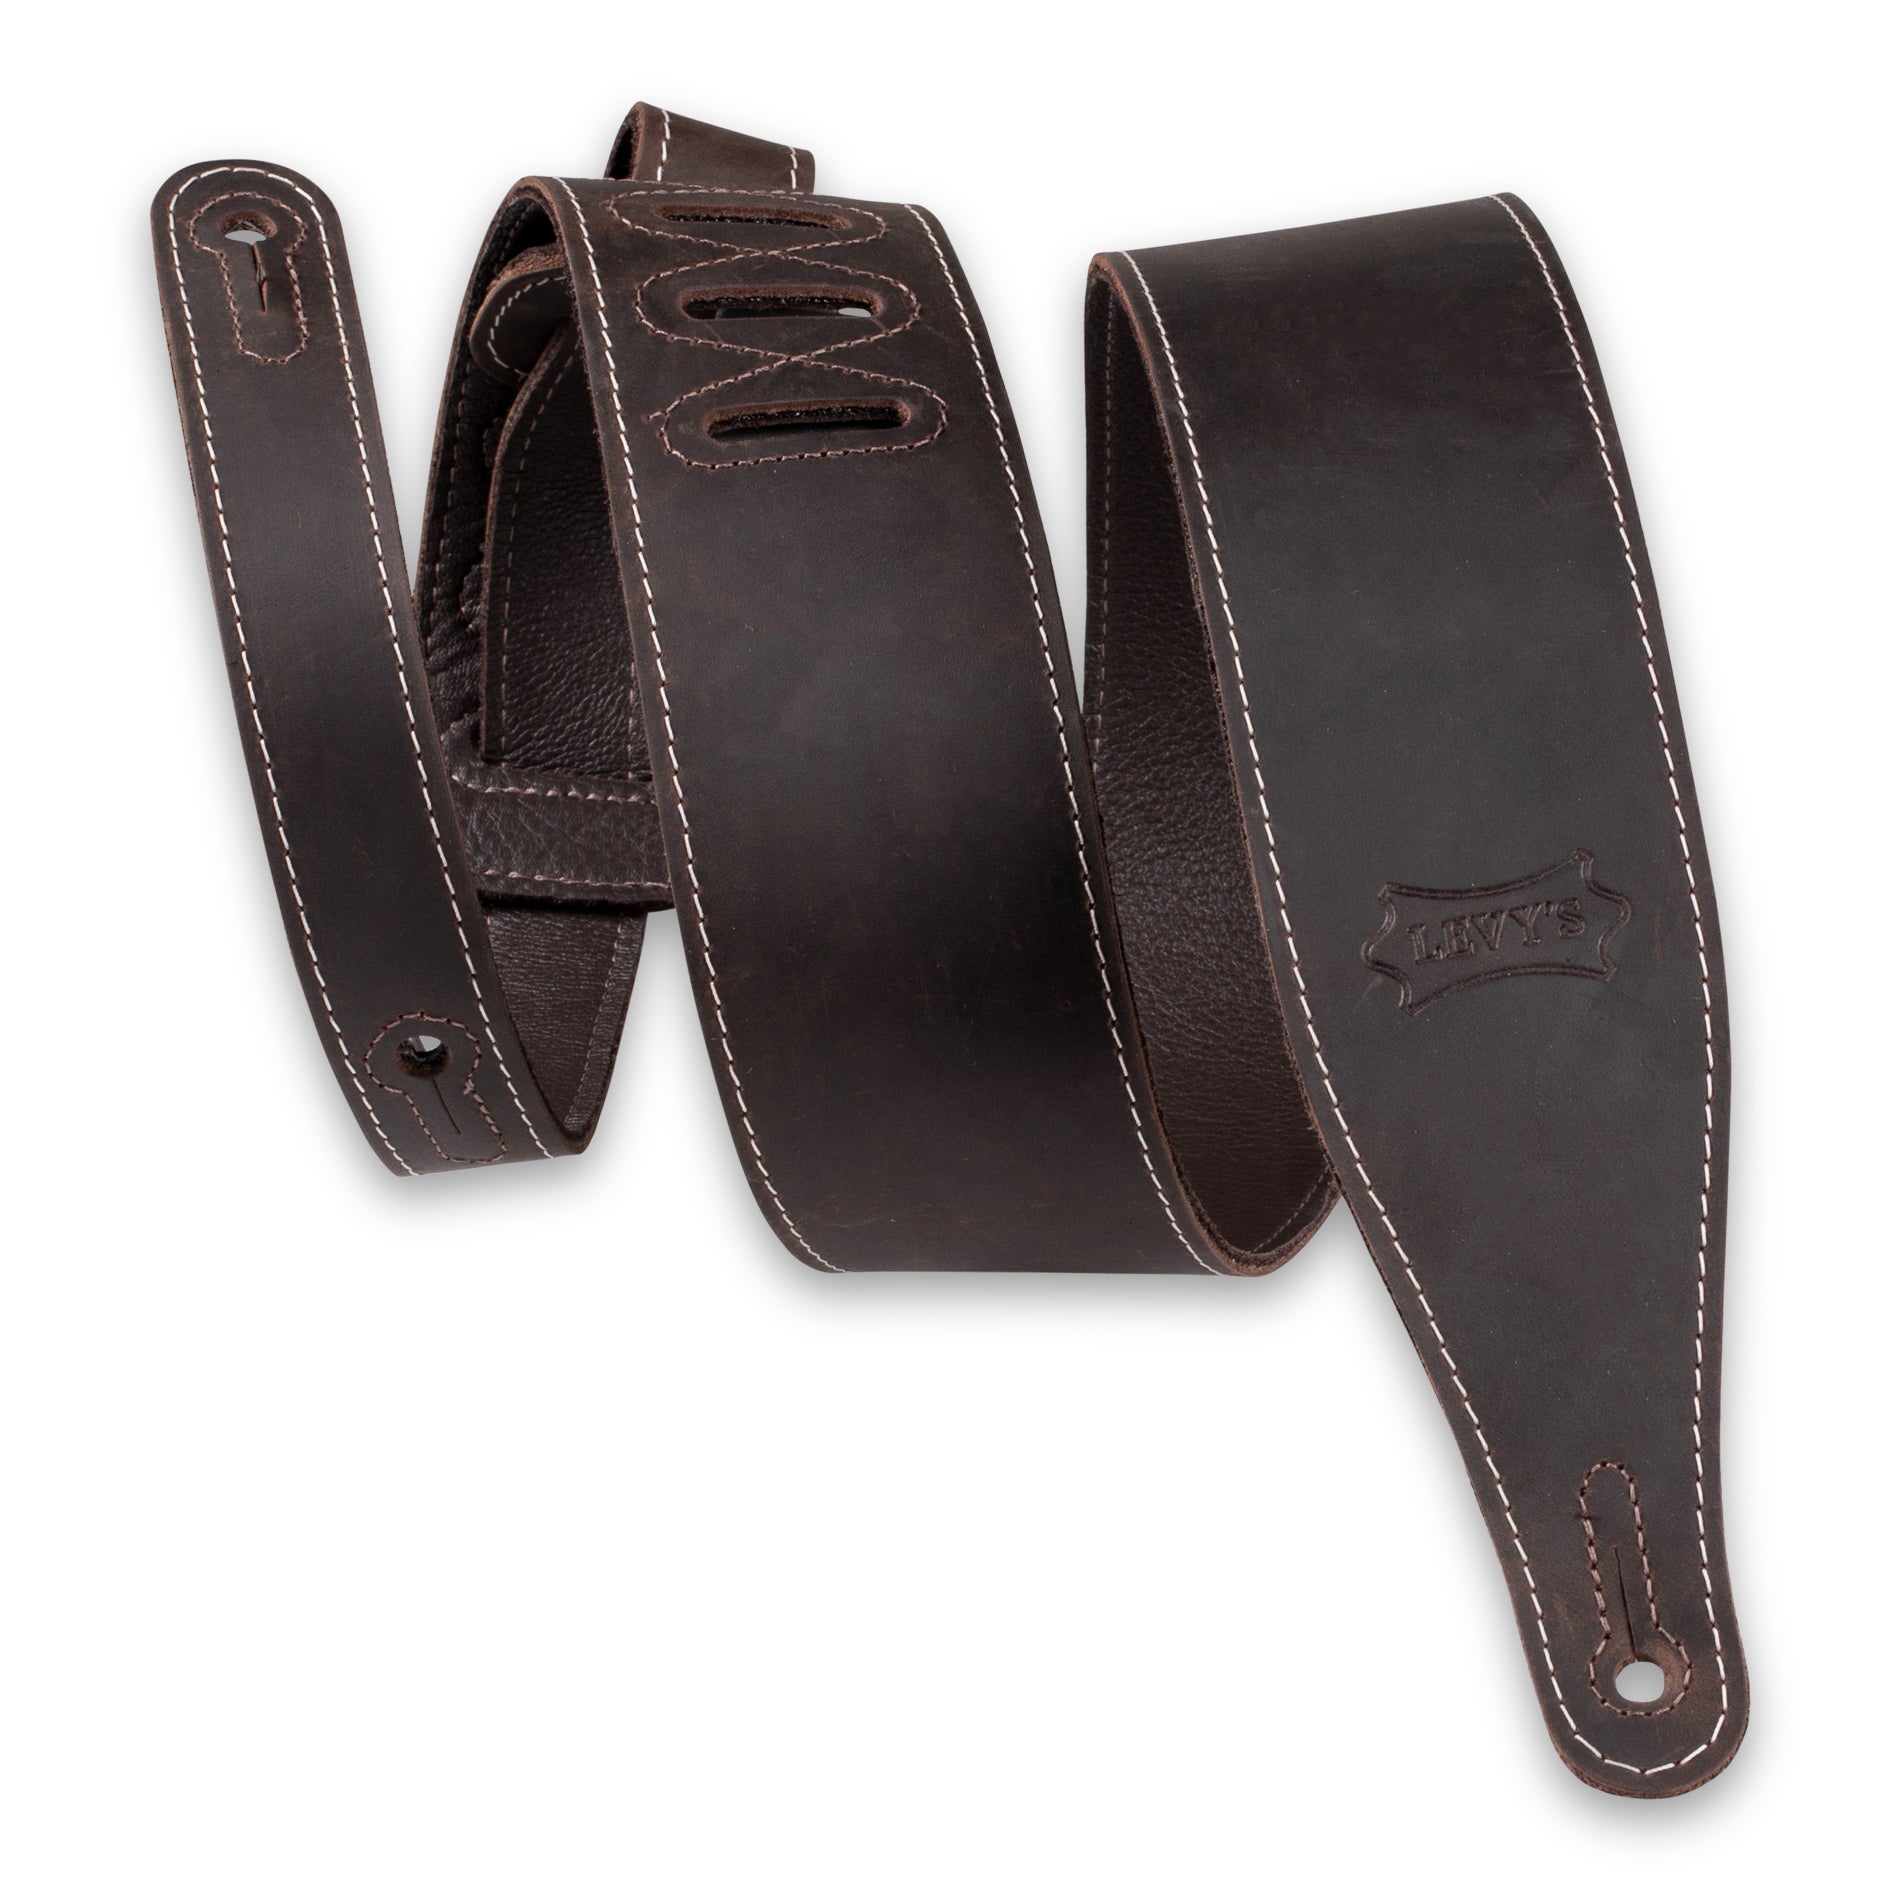 Levy's 2.5" Pull-Up Butter Leather Guitar Strap - Dark Brown